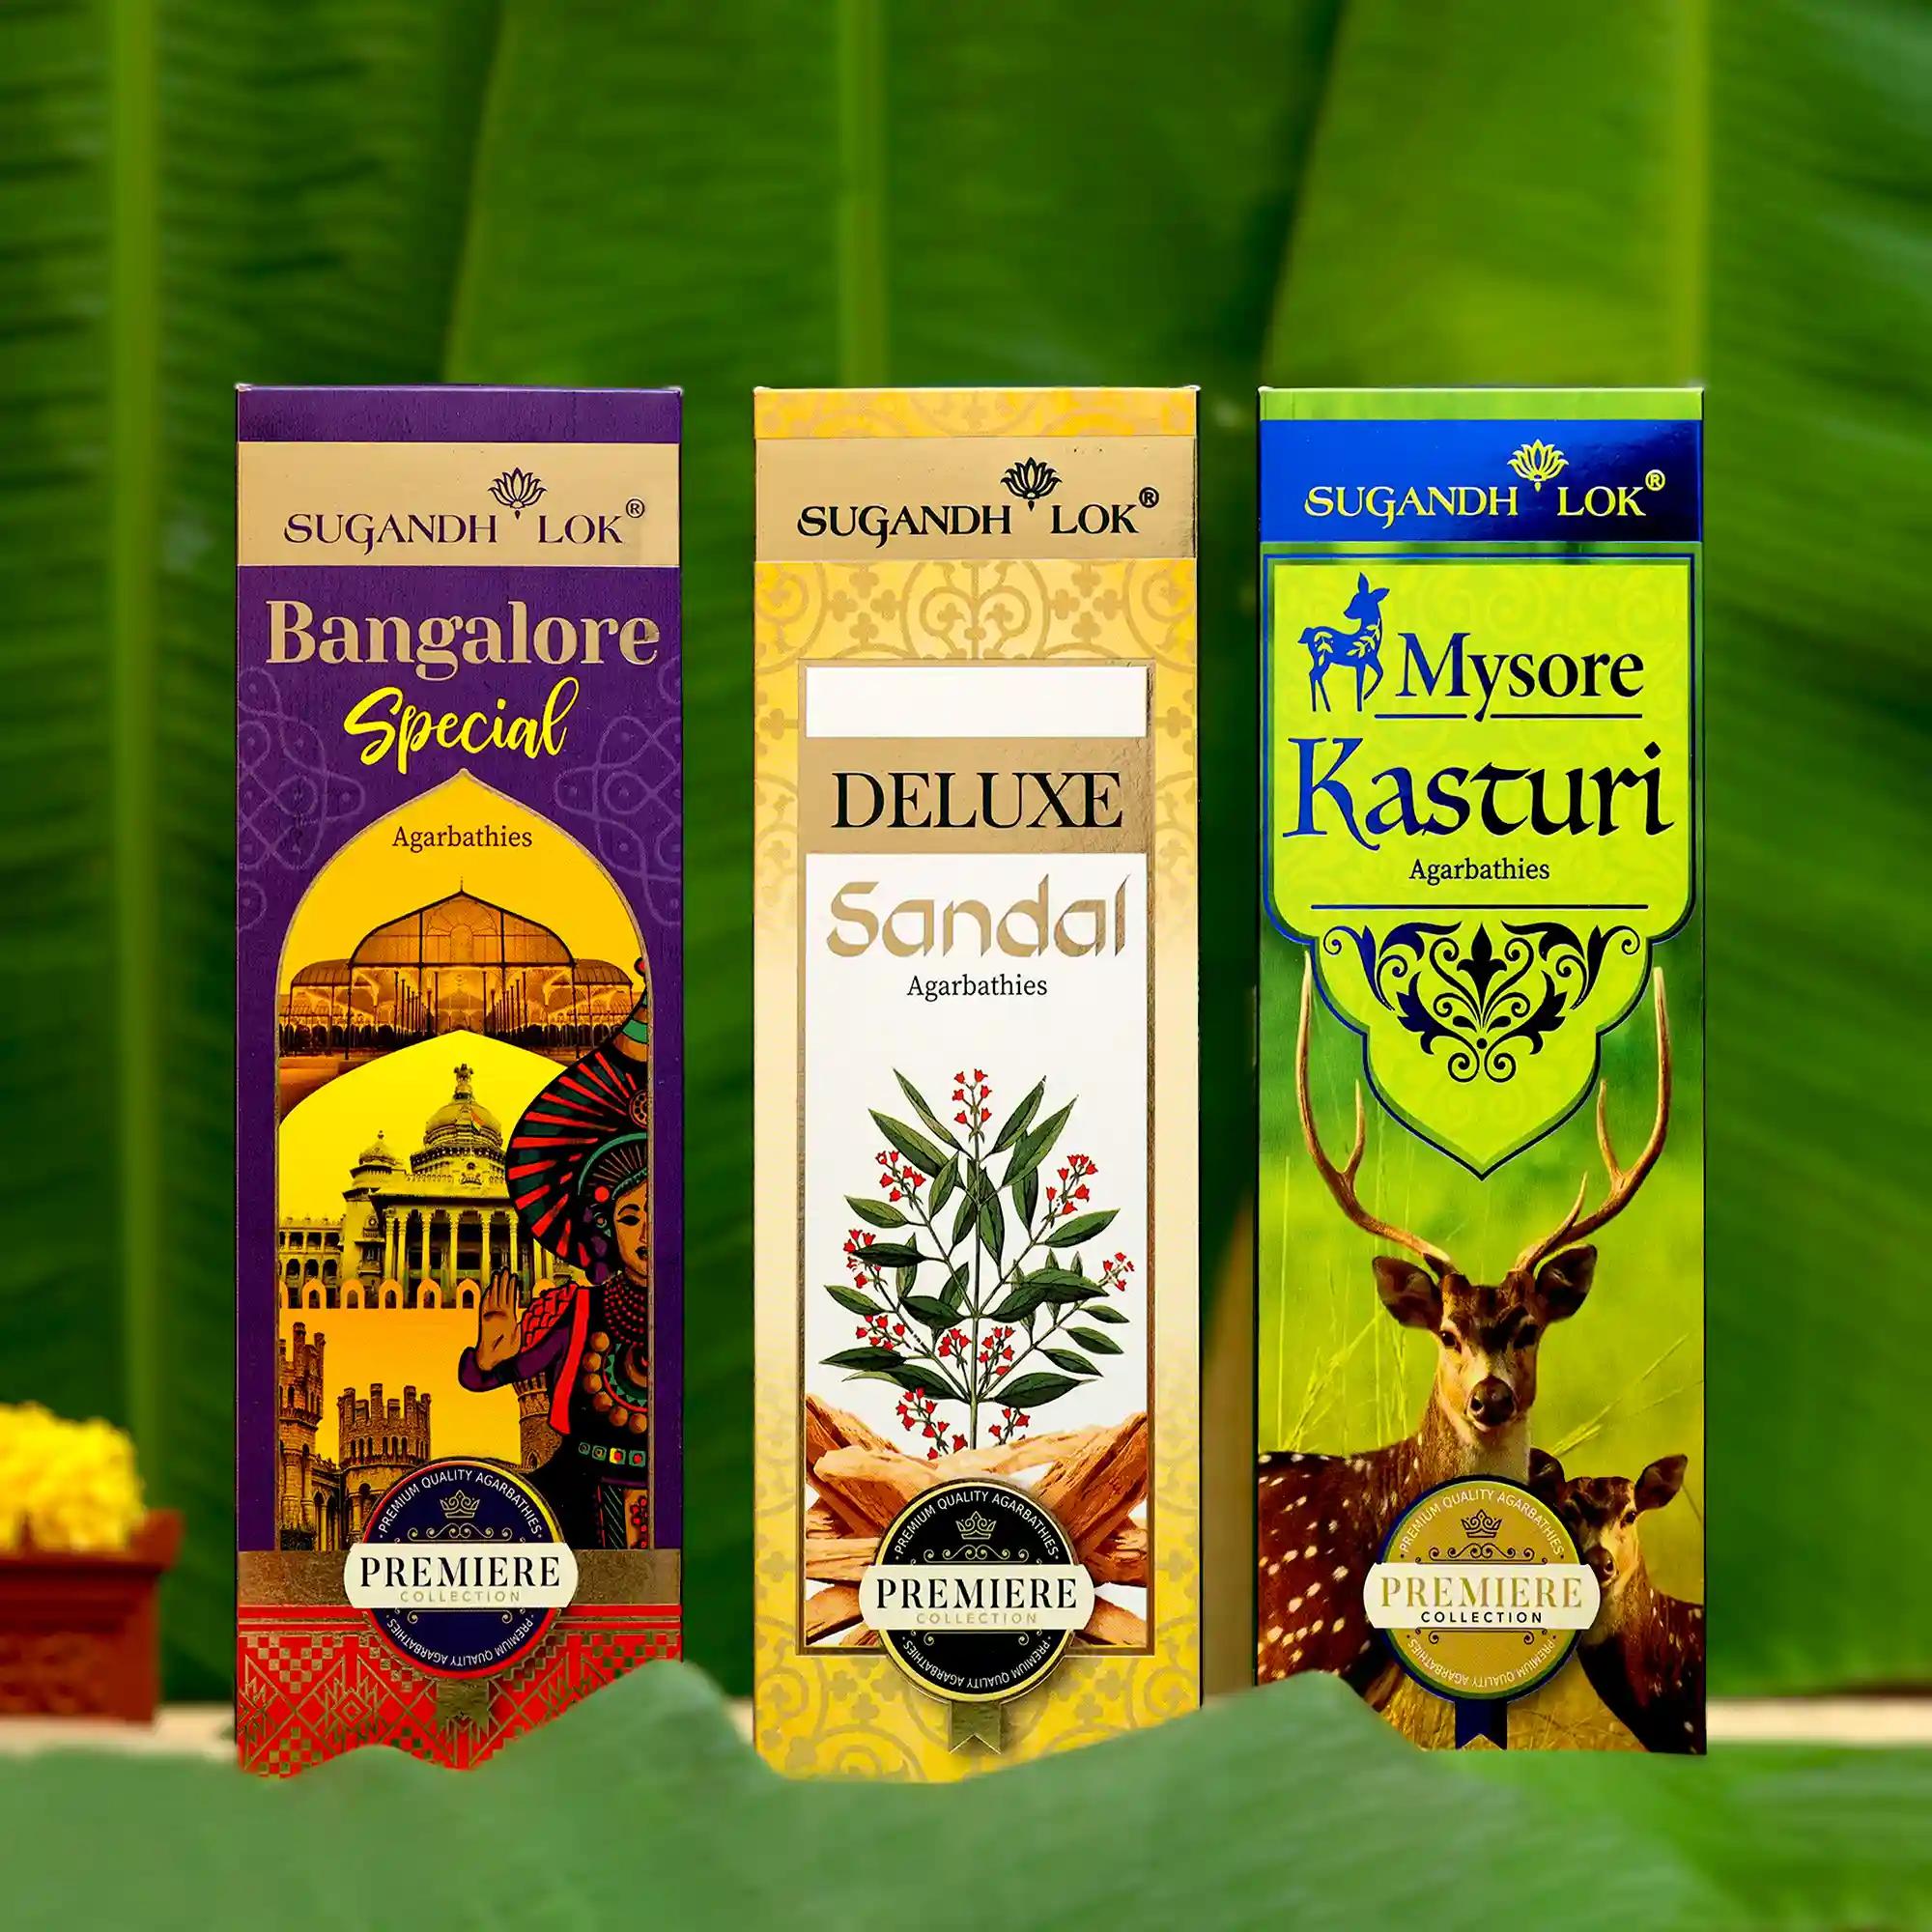 Premium Collection - Southern Symphony Incense Sticks I Fragrance - Mysore Kasturi / Bangalore special /Deluxe Sandal I Recycled Temple Flowers | Hand-crafted | Non-irritant Smoke - Pack of 3